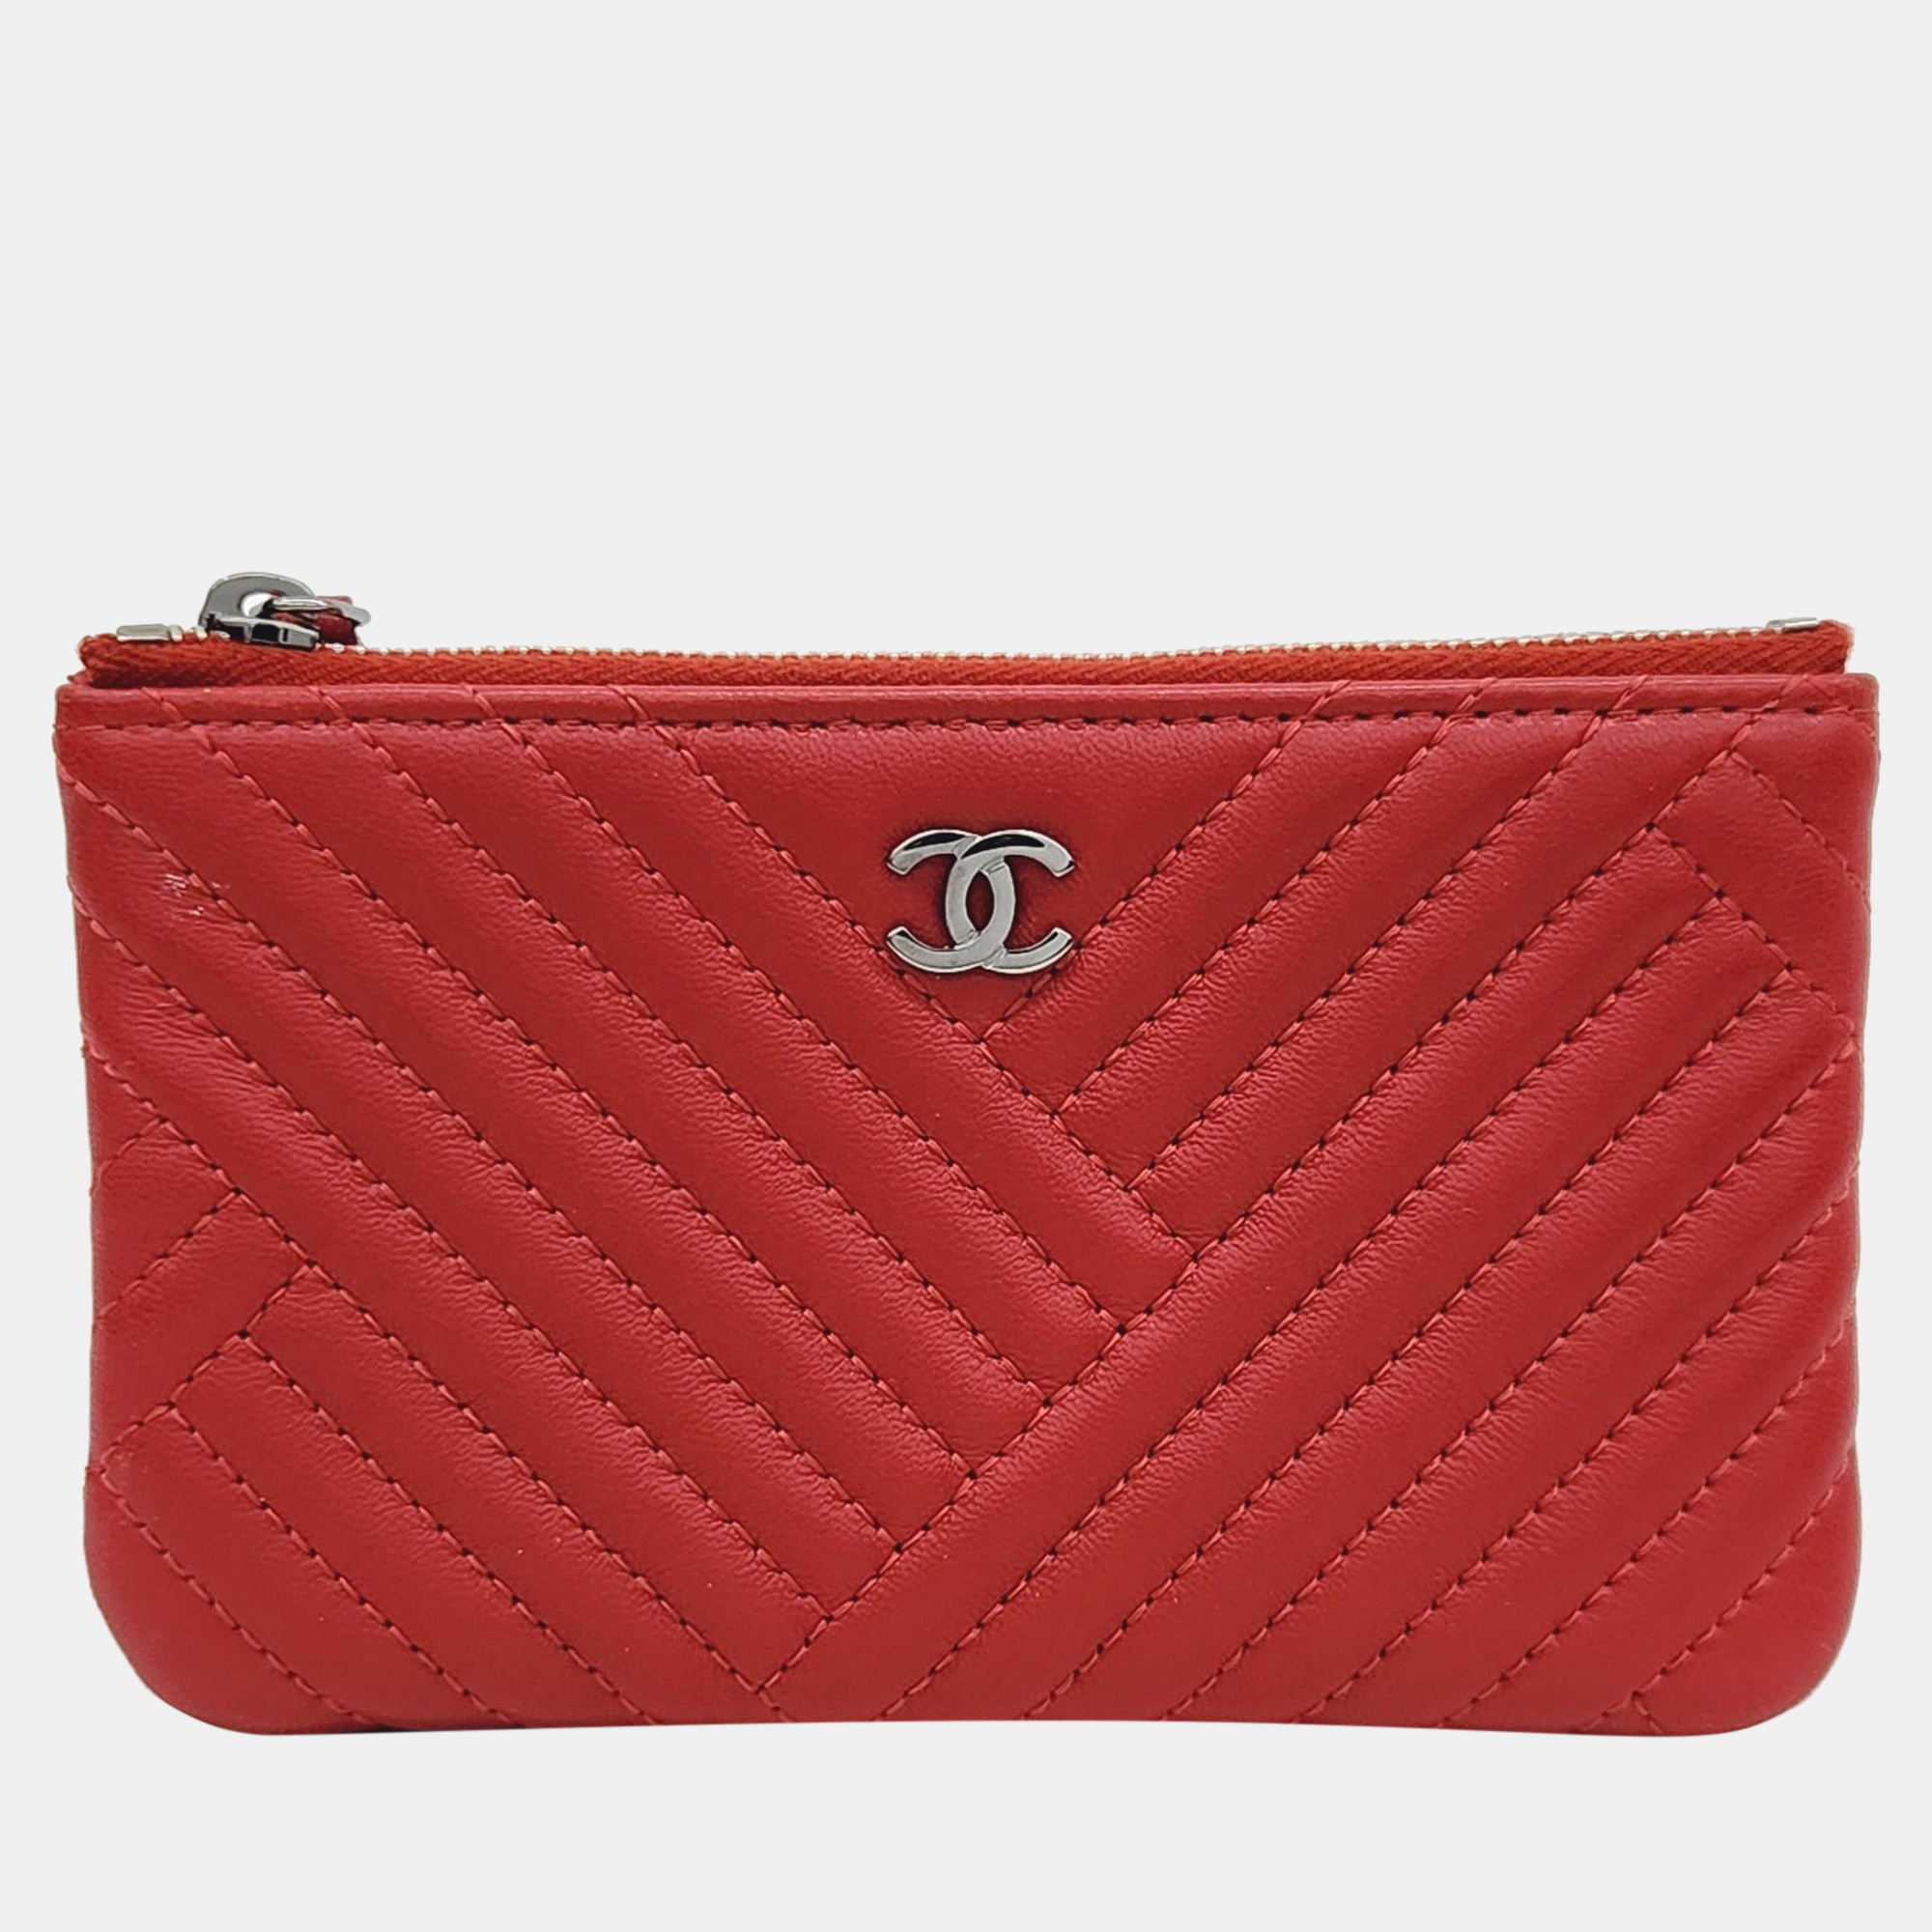 Chanel pouch bag